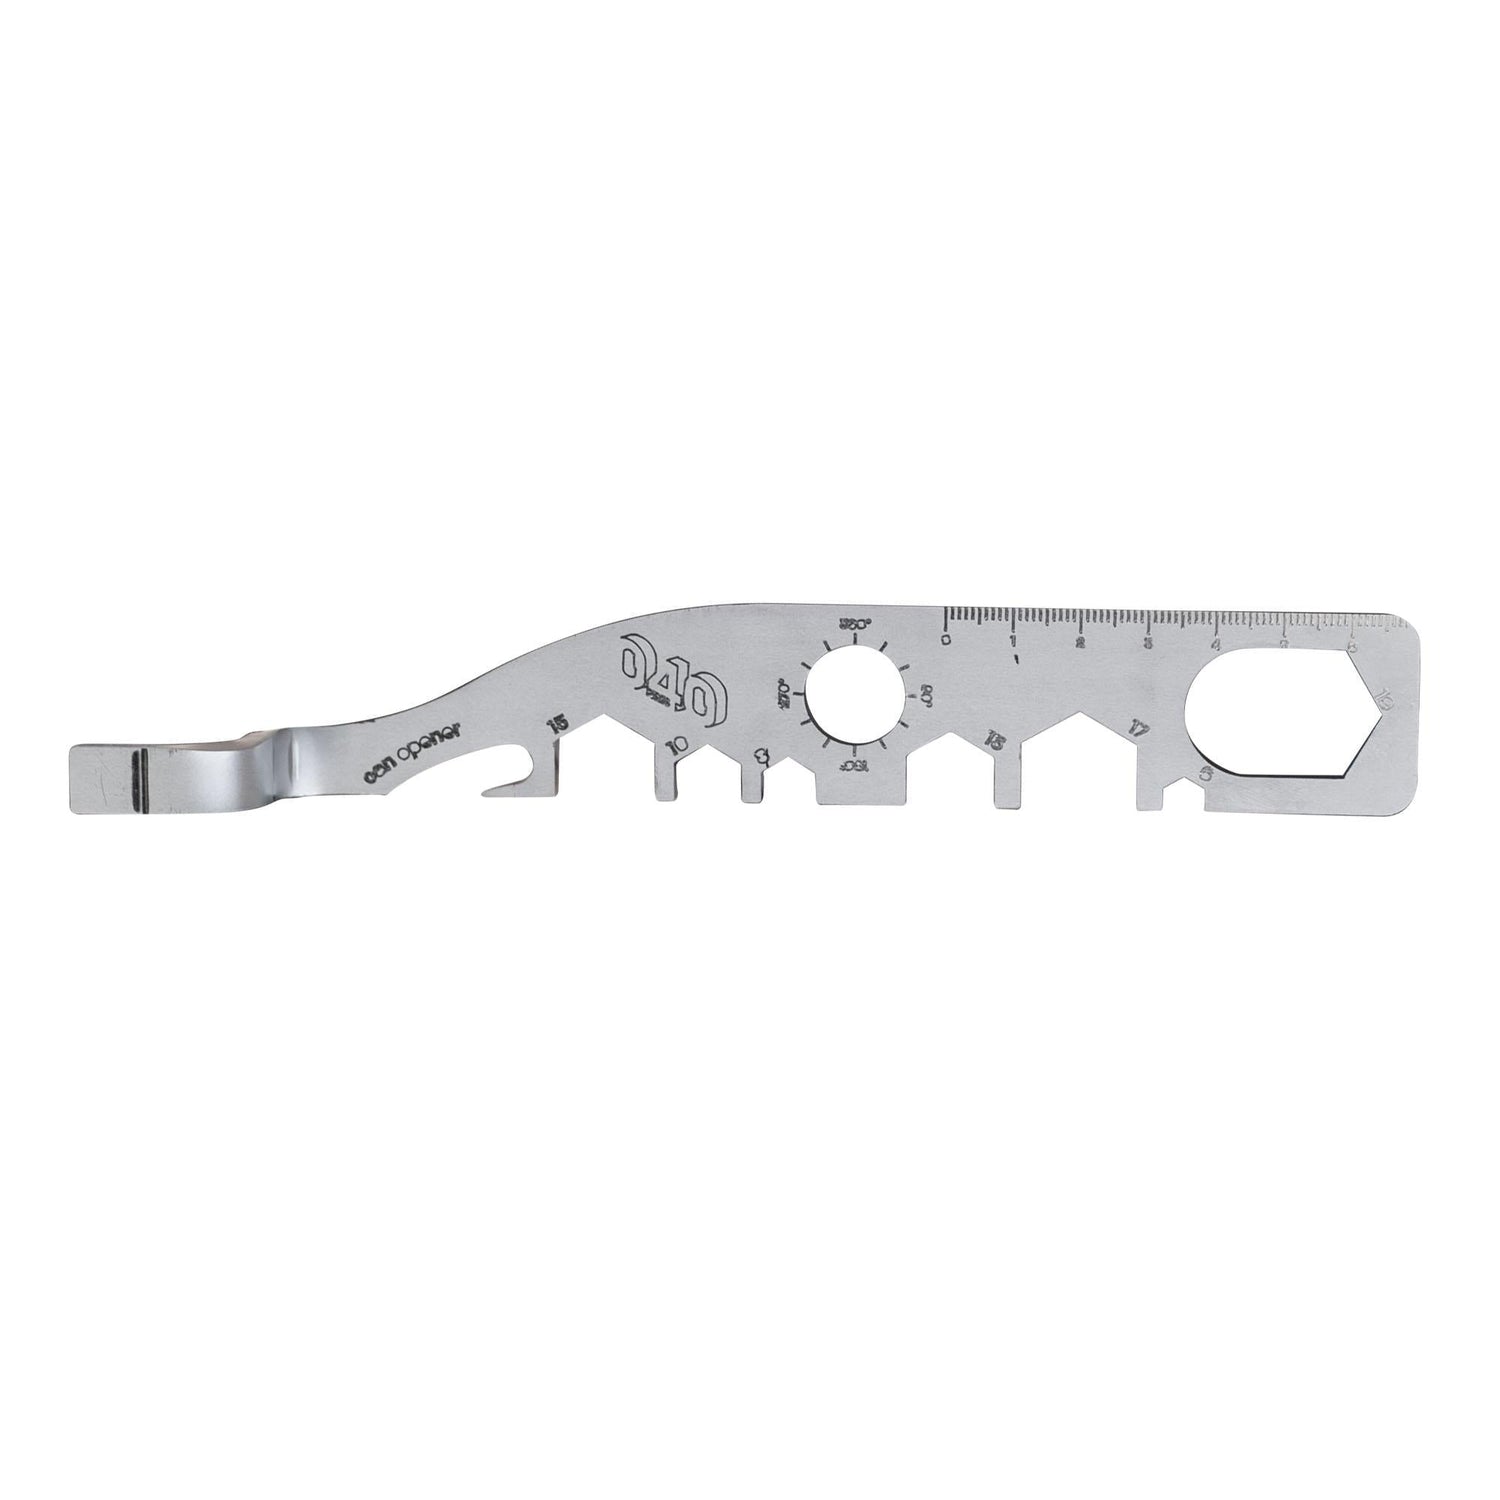 040Parts MultiTool Extra Long Tailgate muestra 20 cm para VW T6, T5, T4  California Beach, Golf, con 6 Kant Key, Bottle Abrener, Ruler y mucho más -  Mixcover